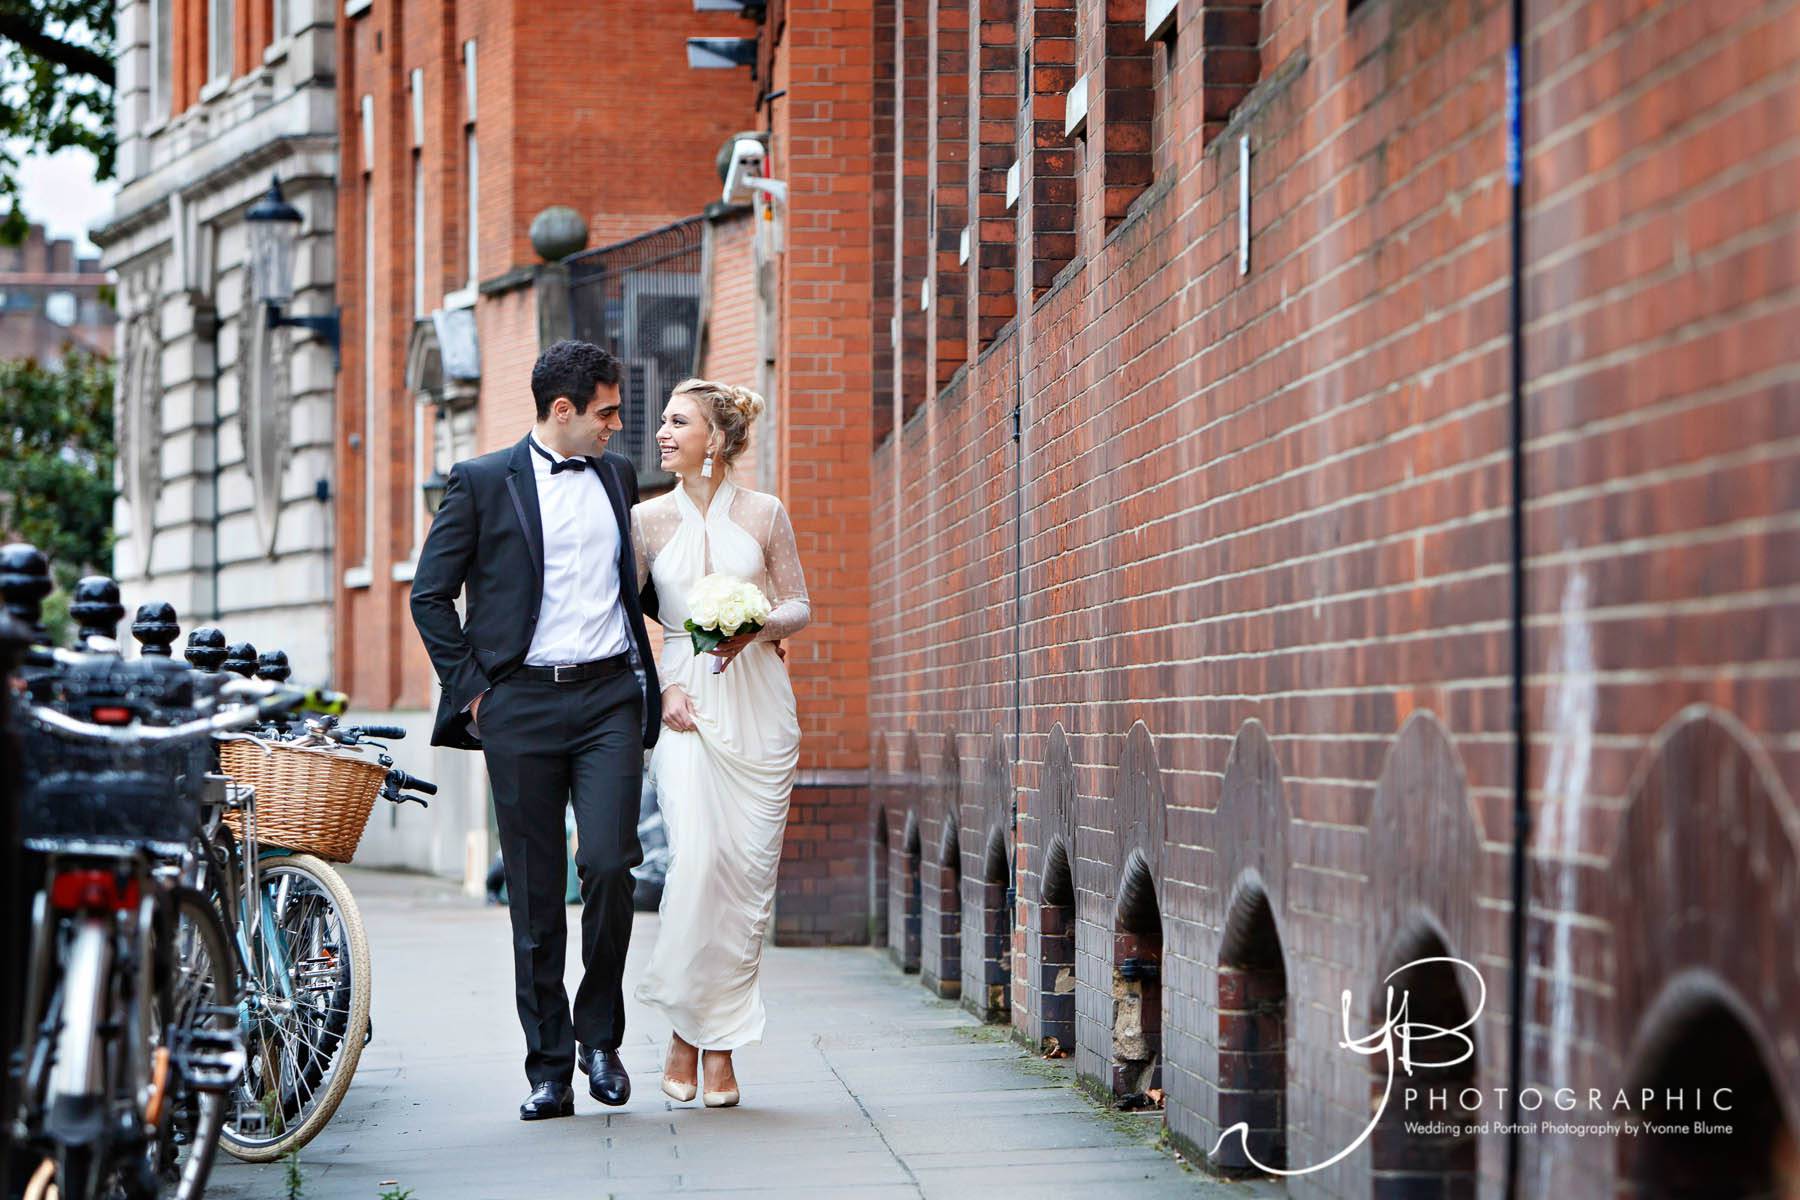 Chelsea Register Office Wedding Portraits by YBPHOTOGRAPHIC